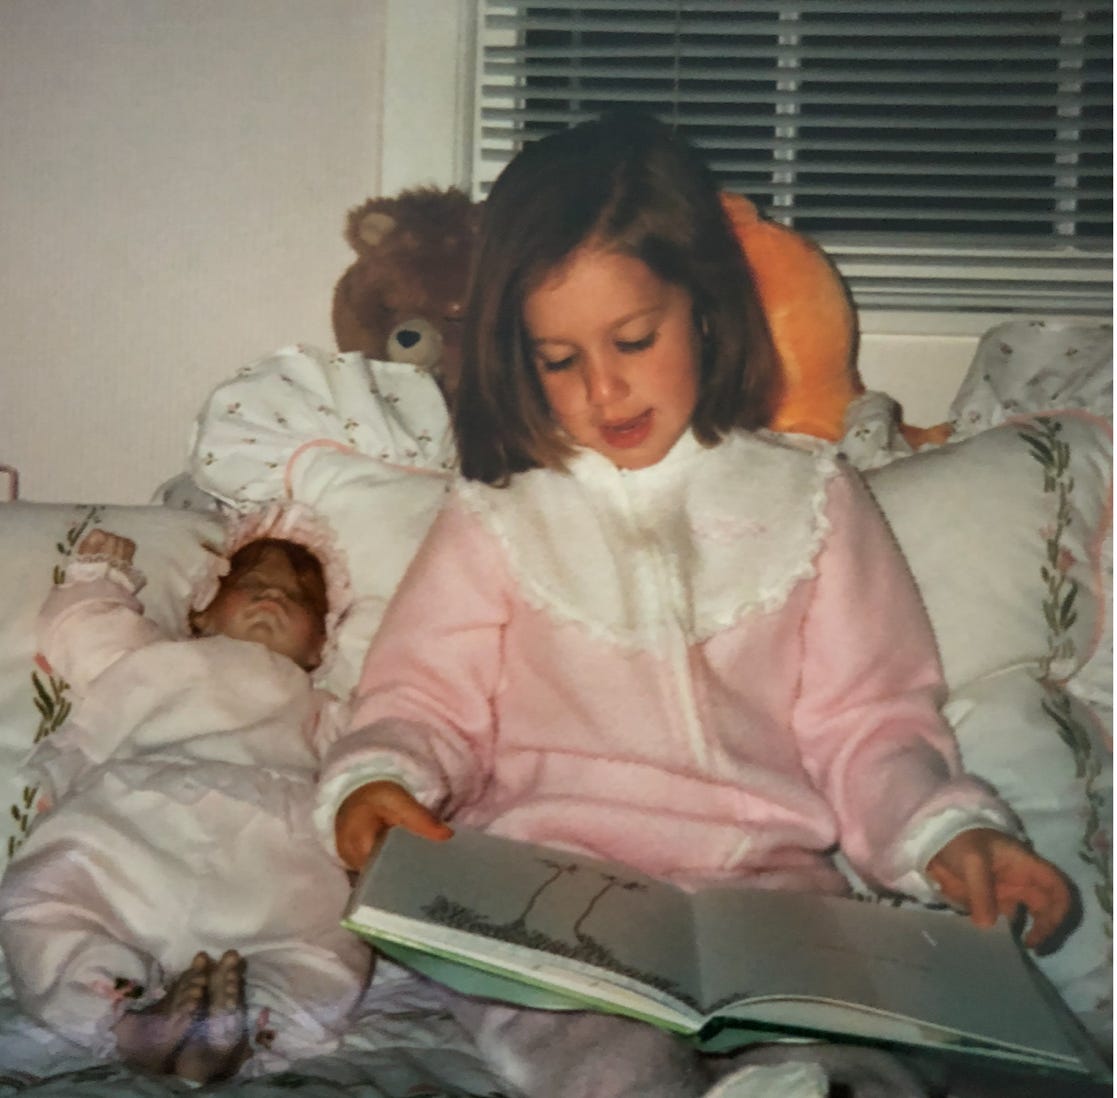 A child reading a book on a bed with a doll

Description automatically generated